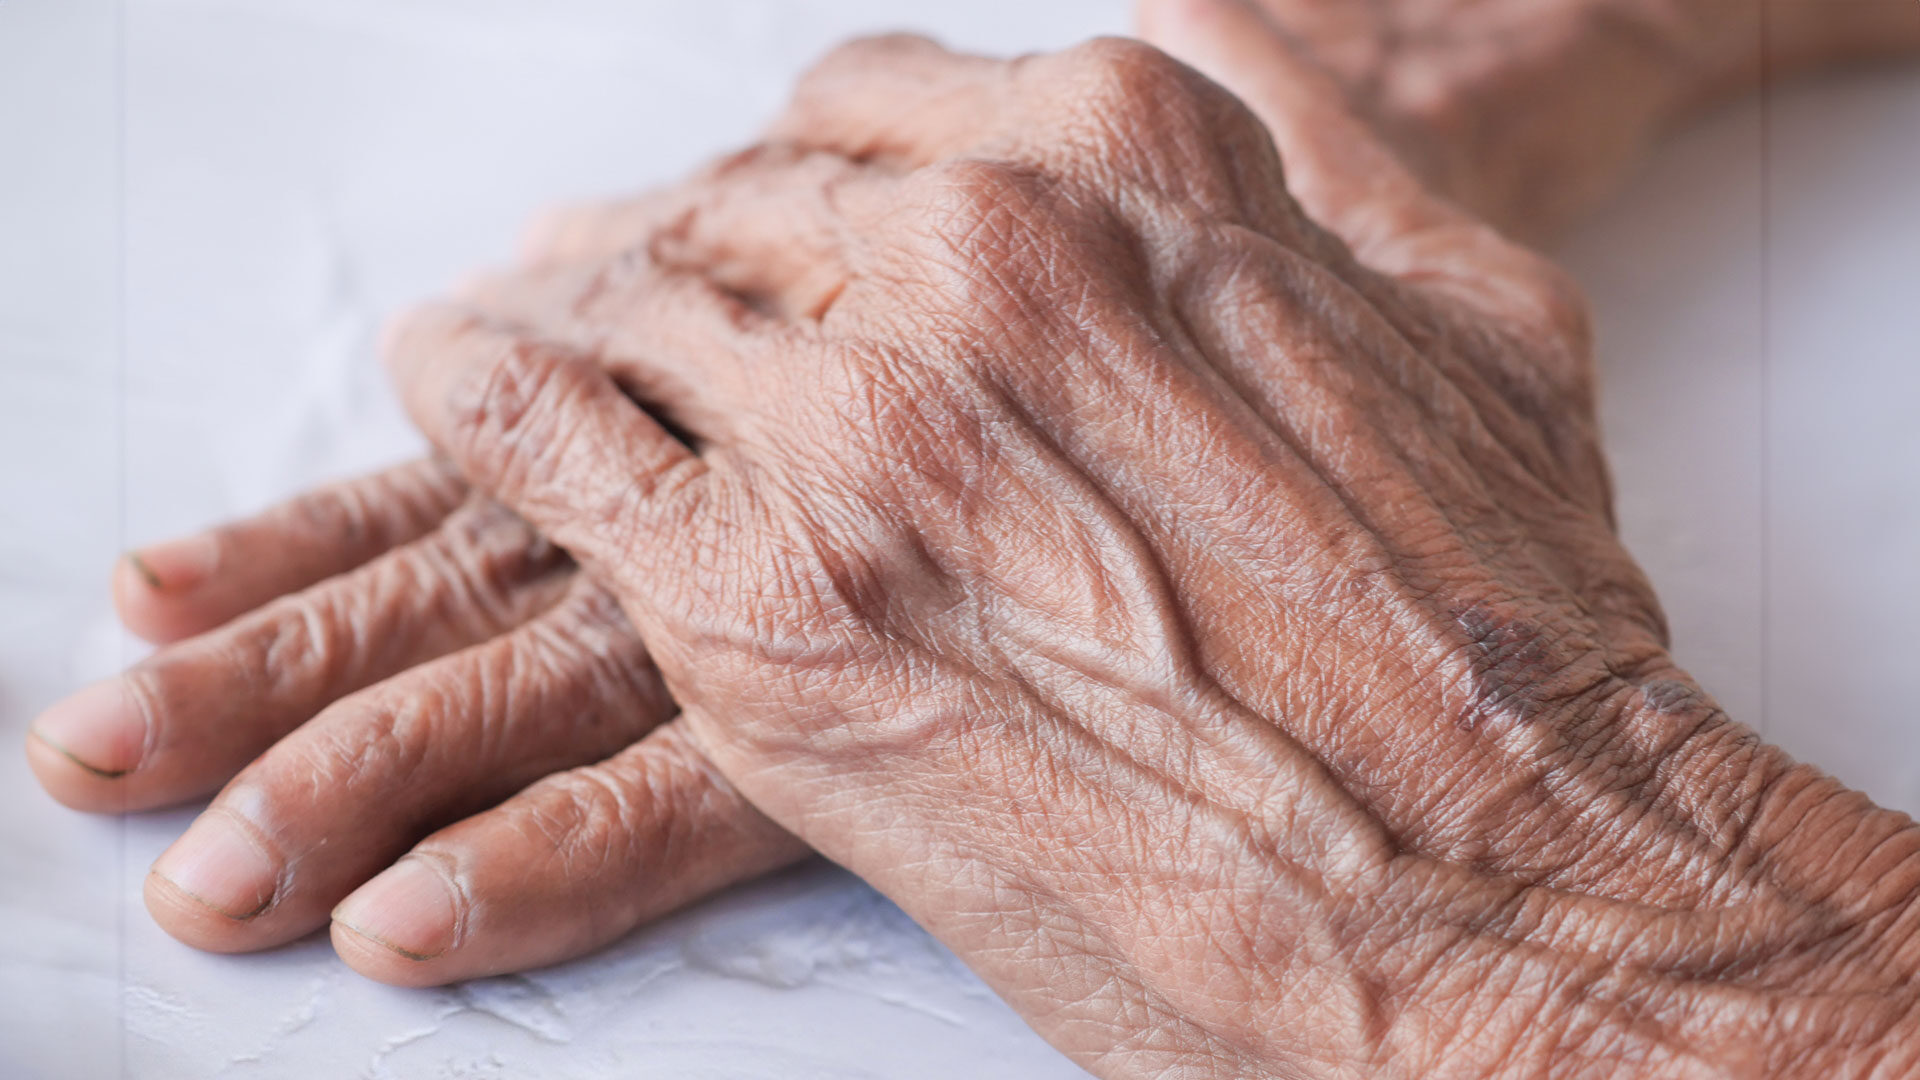 Close-up of an individual with Parkinson's hands, embodying the challenges and resilience in managing the disease, and emphasizing the importance of comprehensive care strategies, lifestyle adjustments, and professional support to thrive despite Parkinson's.